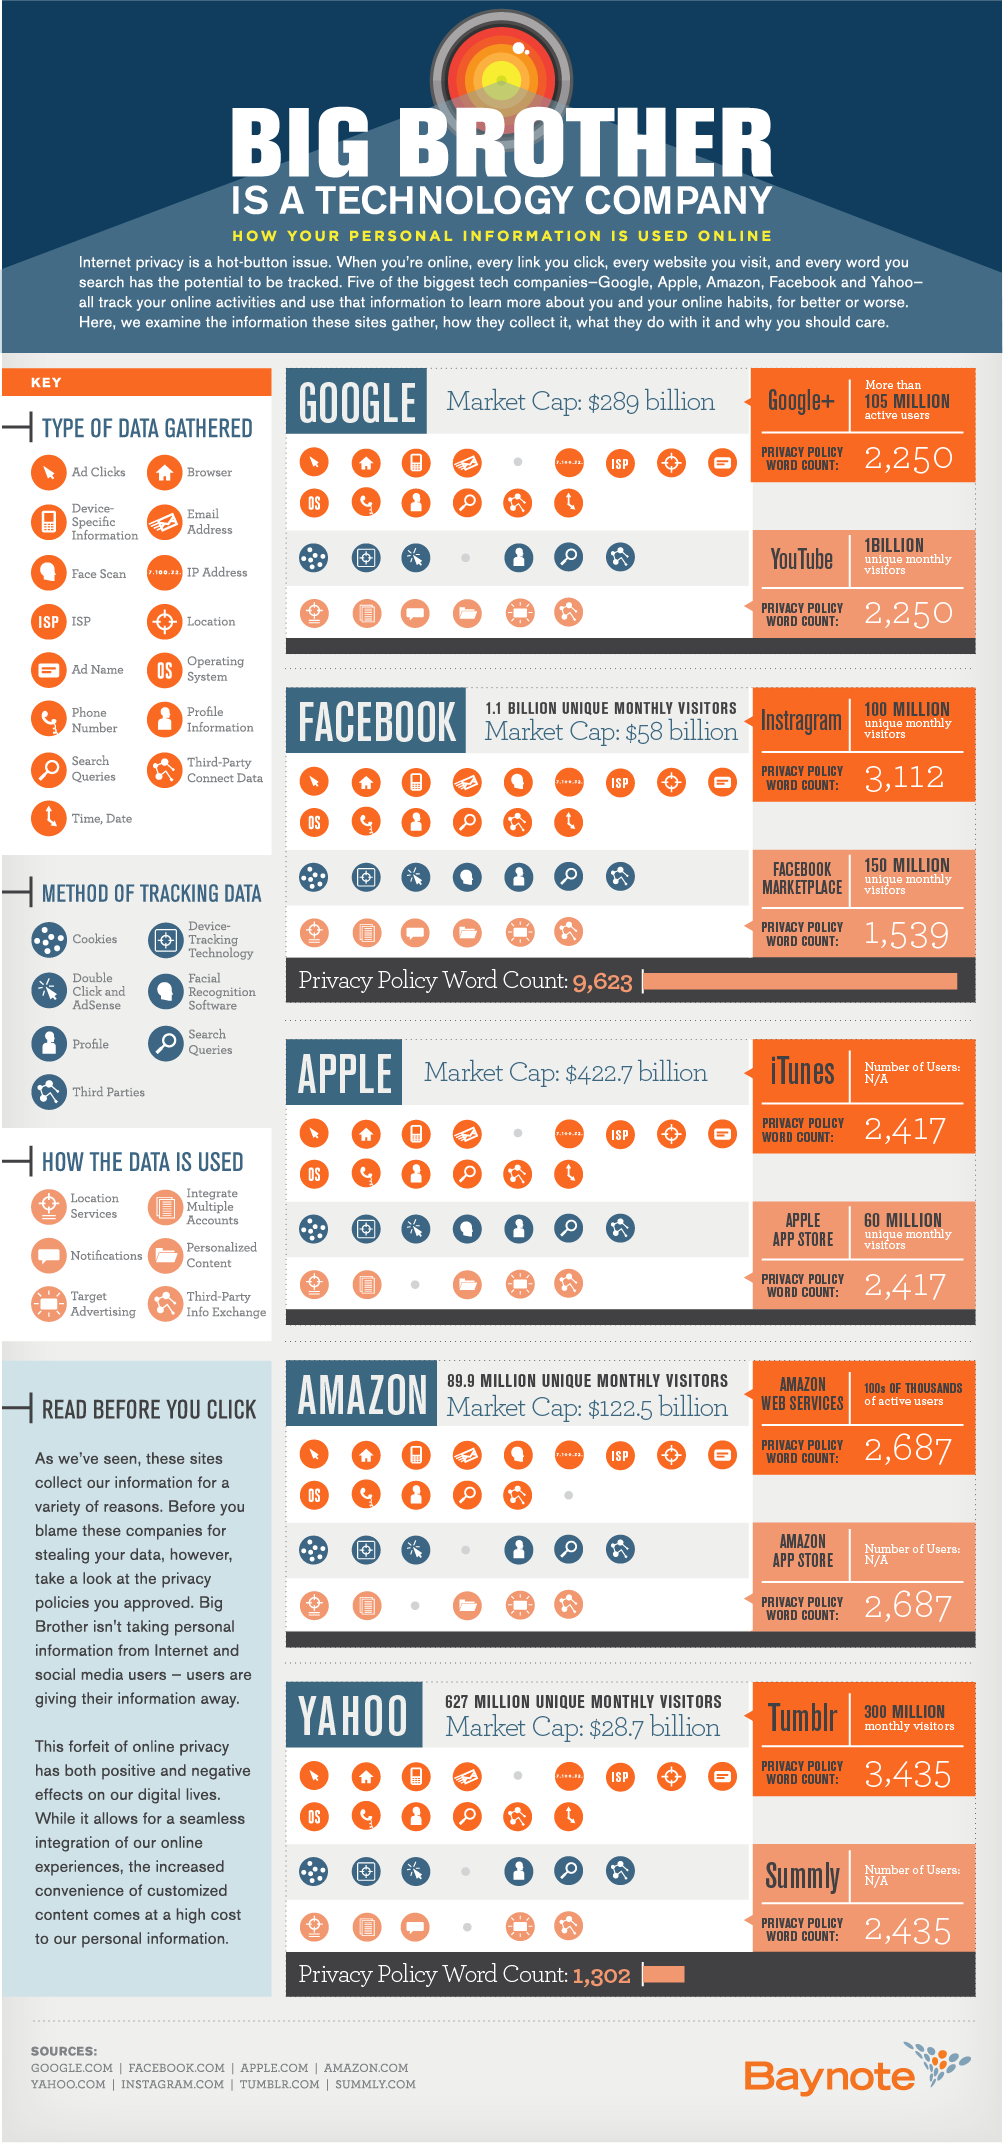 Infographic_Big_Brother_Tech_Company_06192013